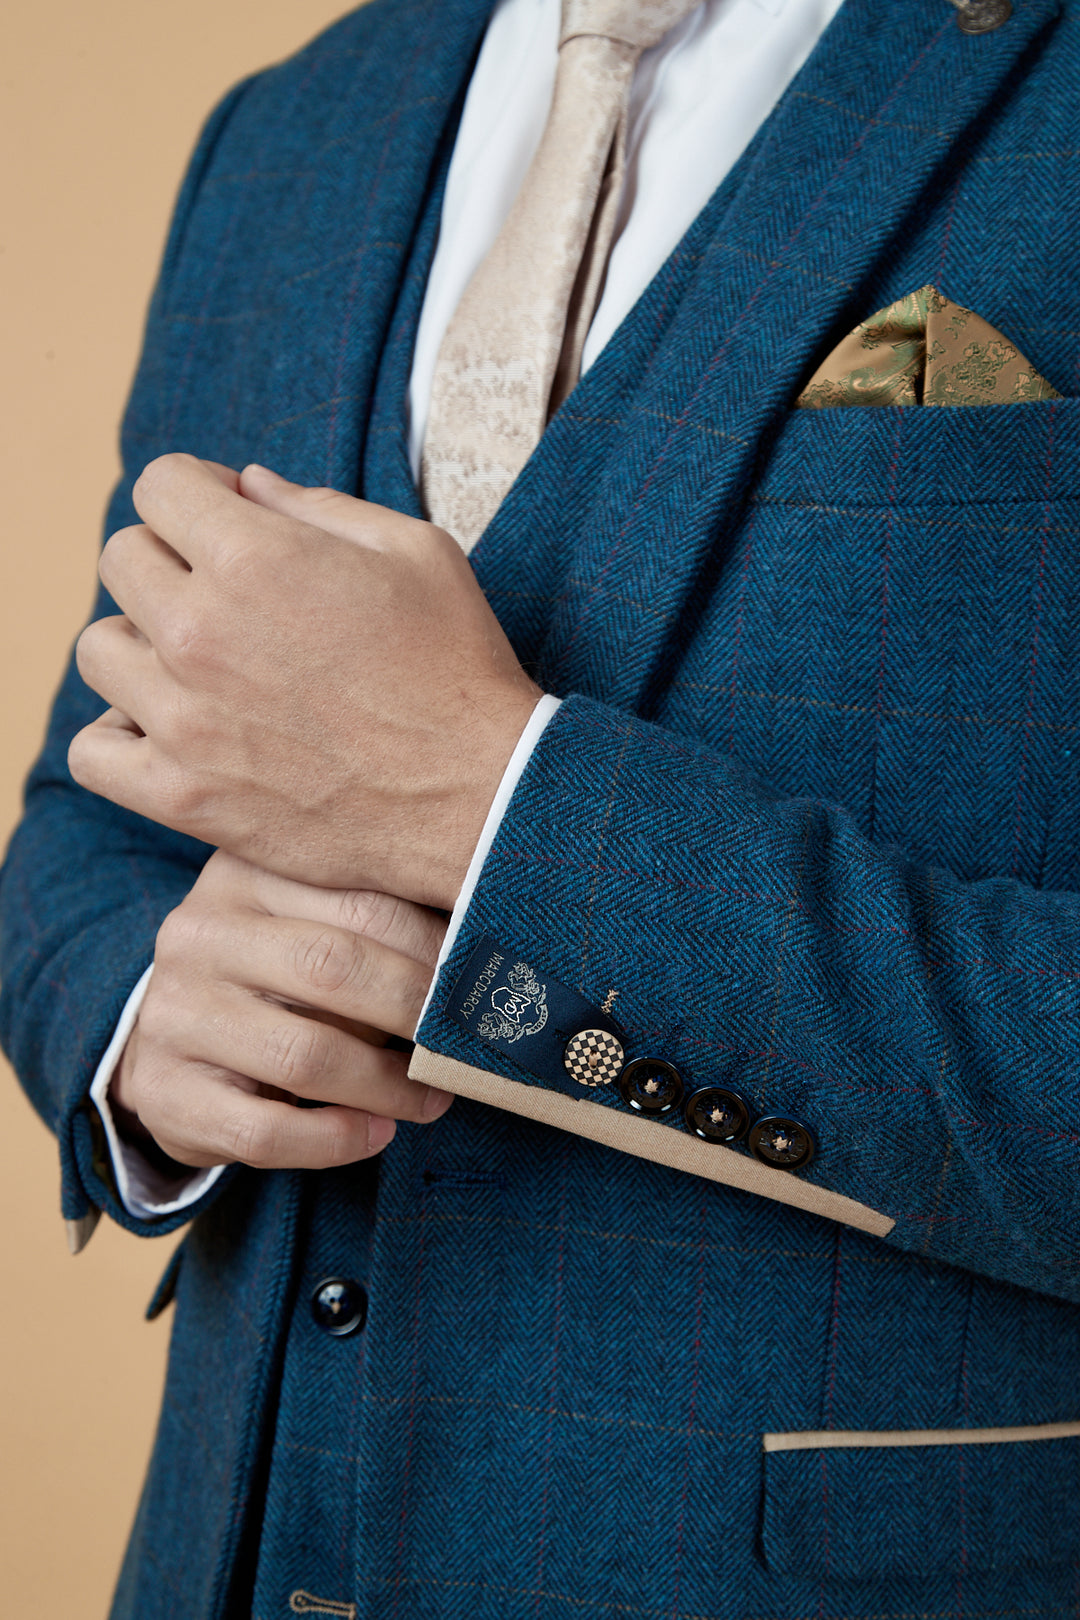 DION - Blue Tweed Check Two Piece Suit